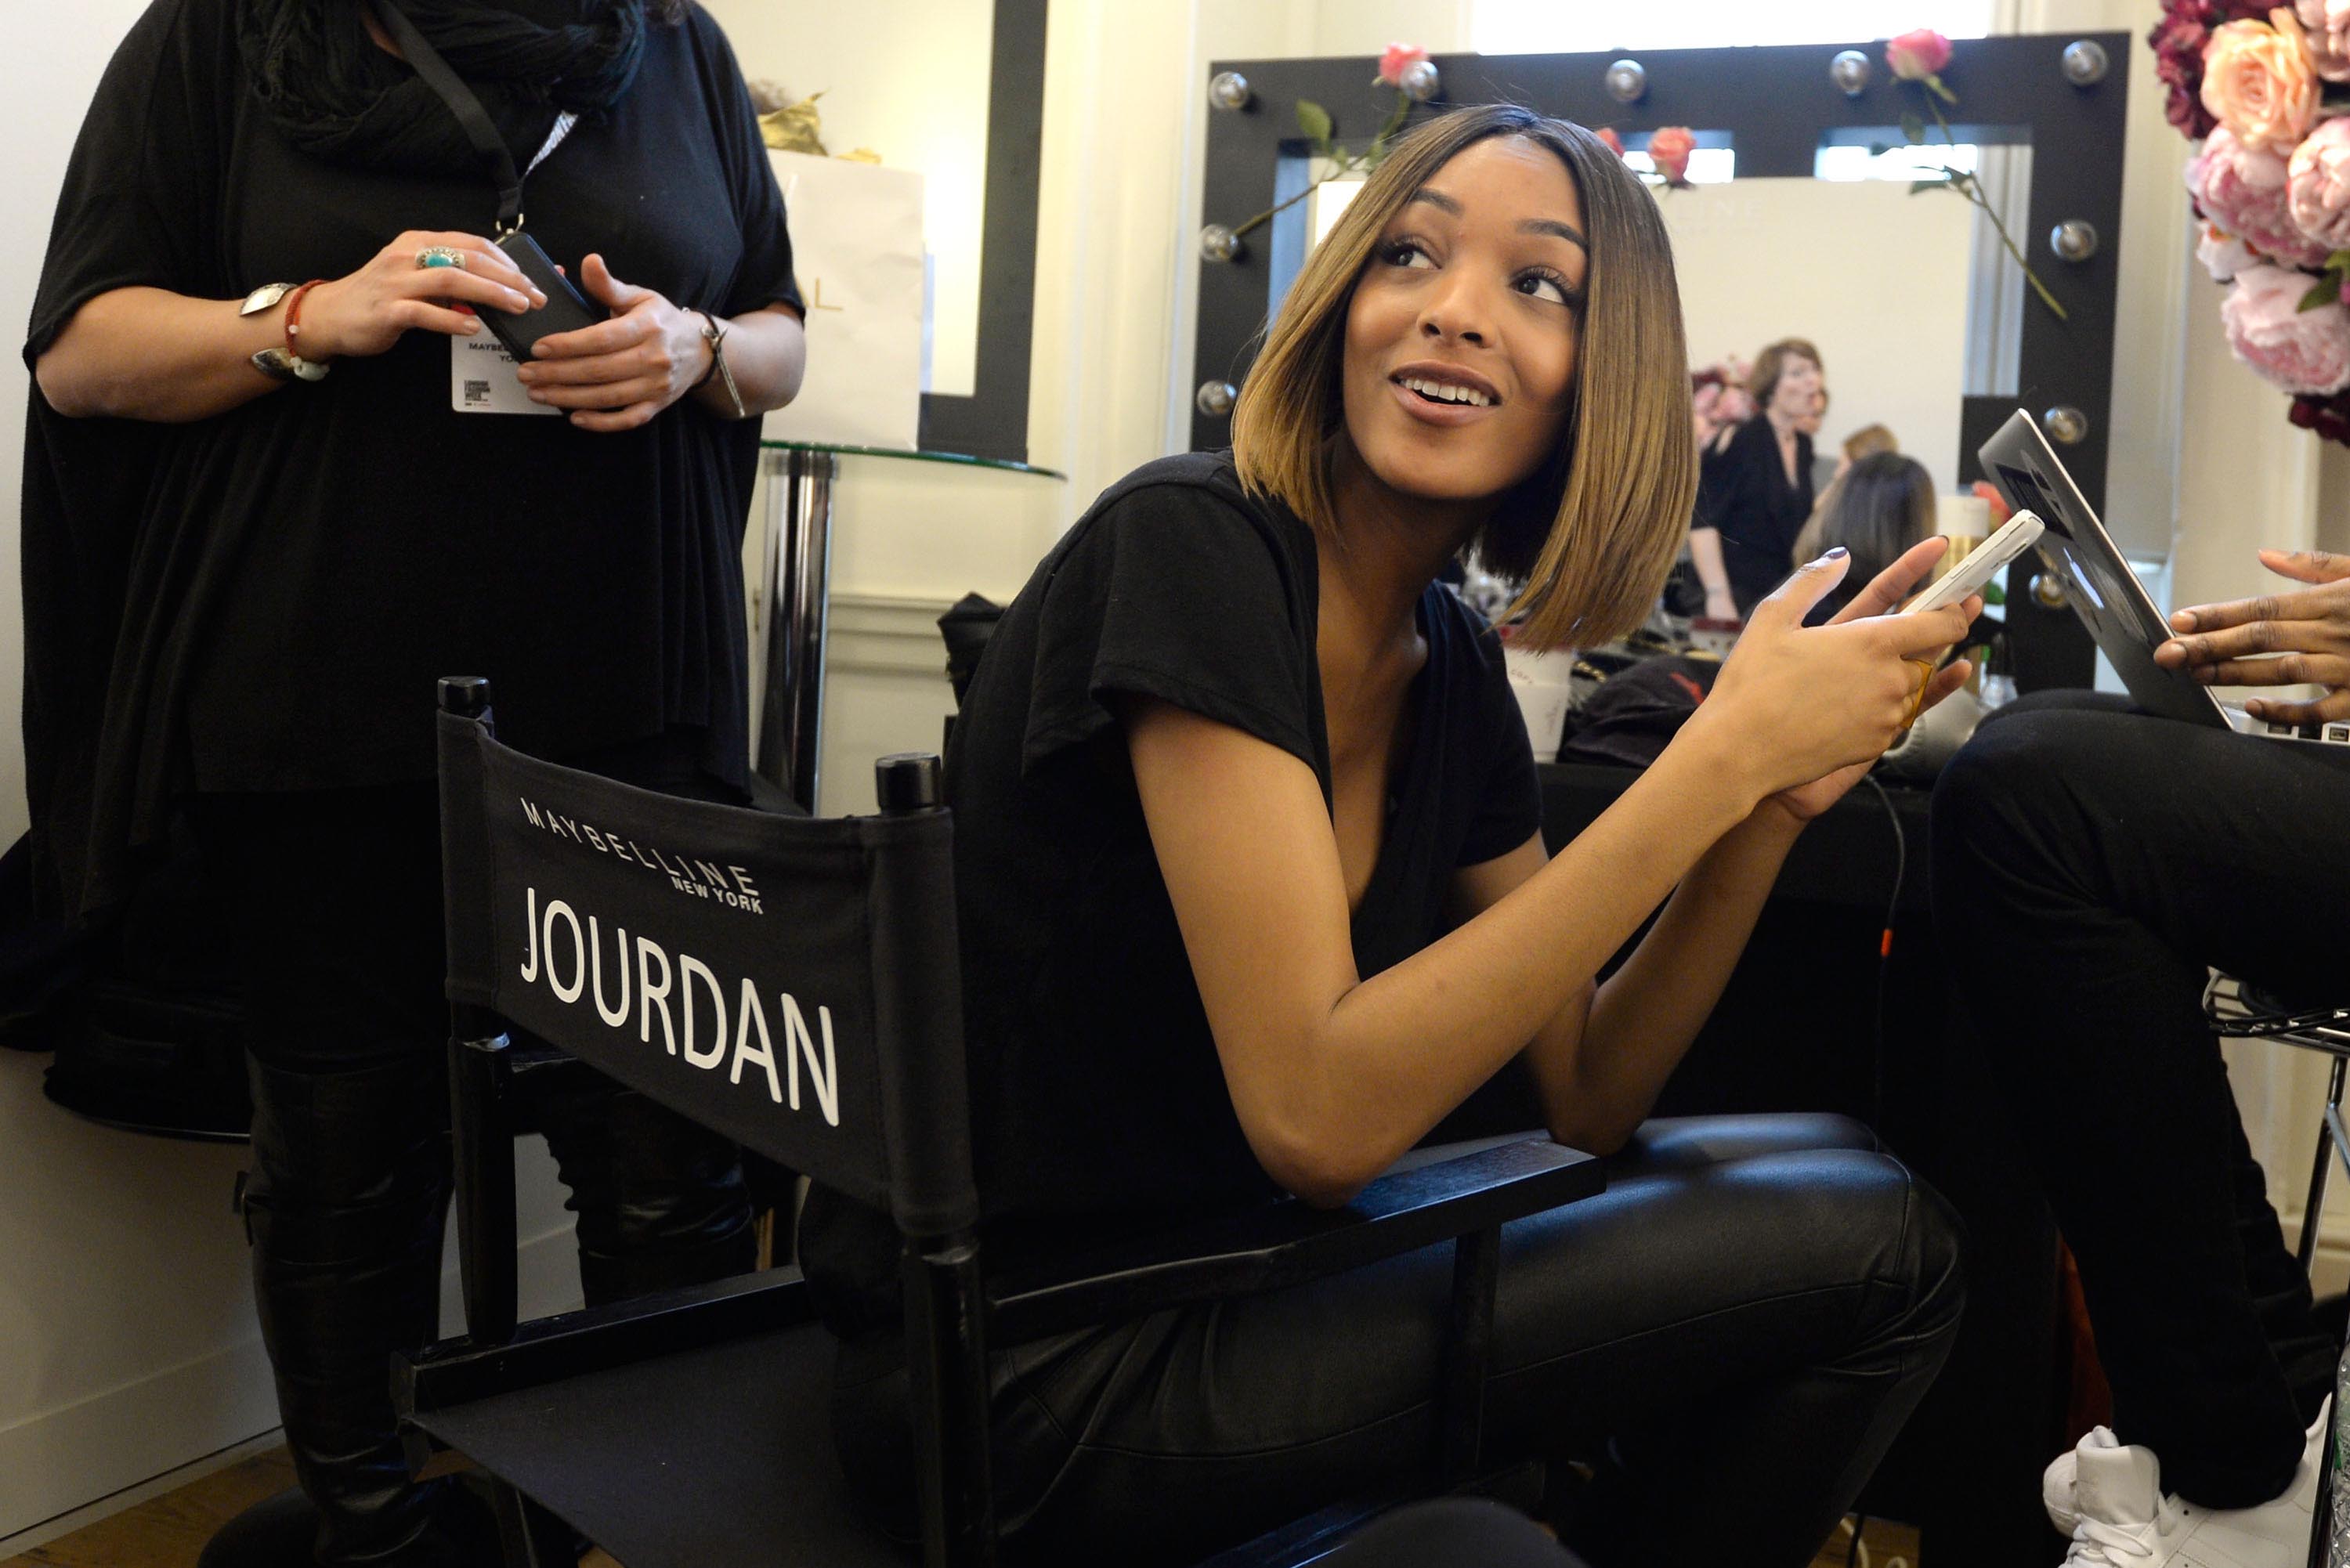 Jourdan Dunn at LFW with Maybelline New York press event